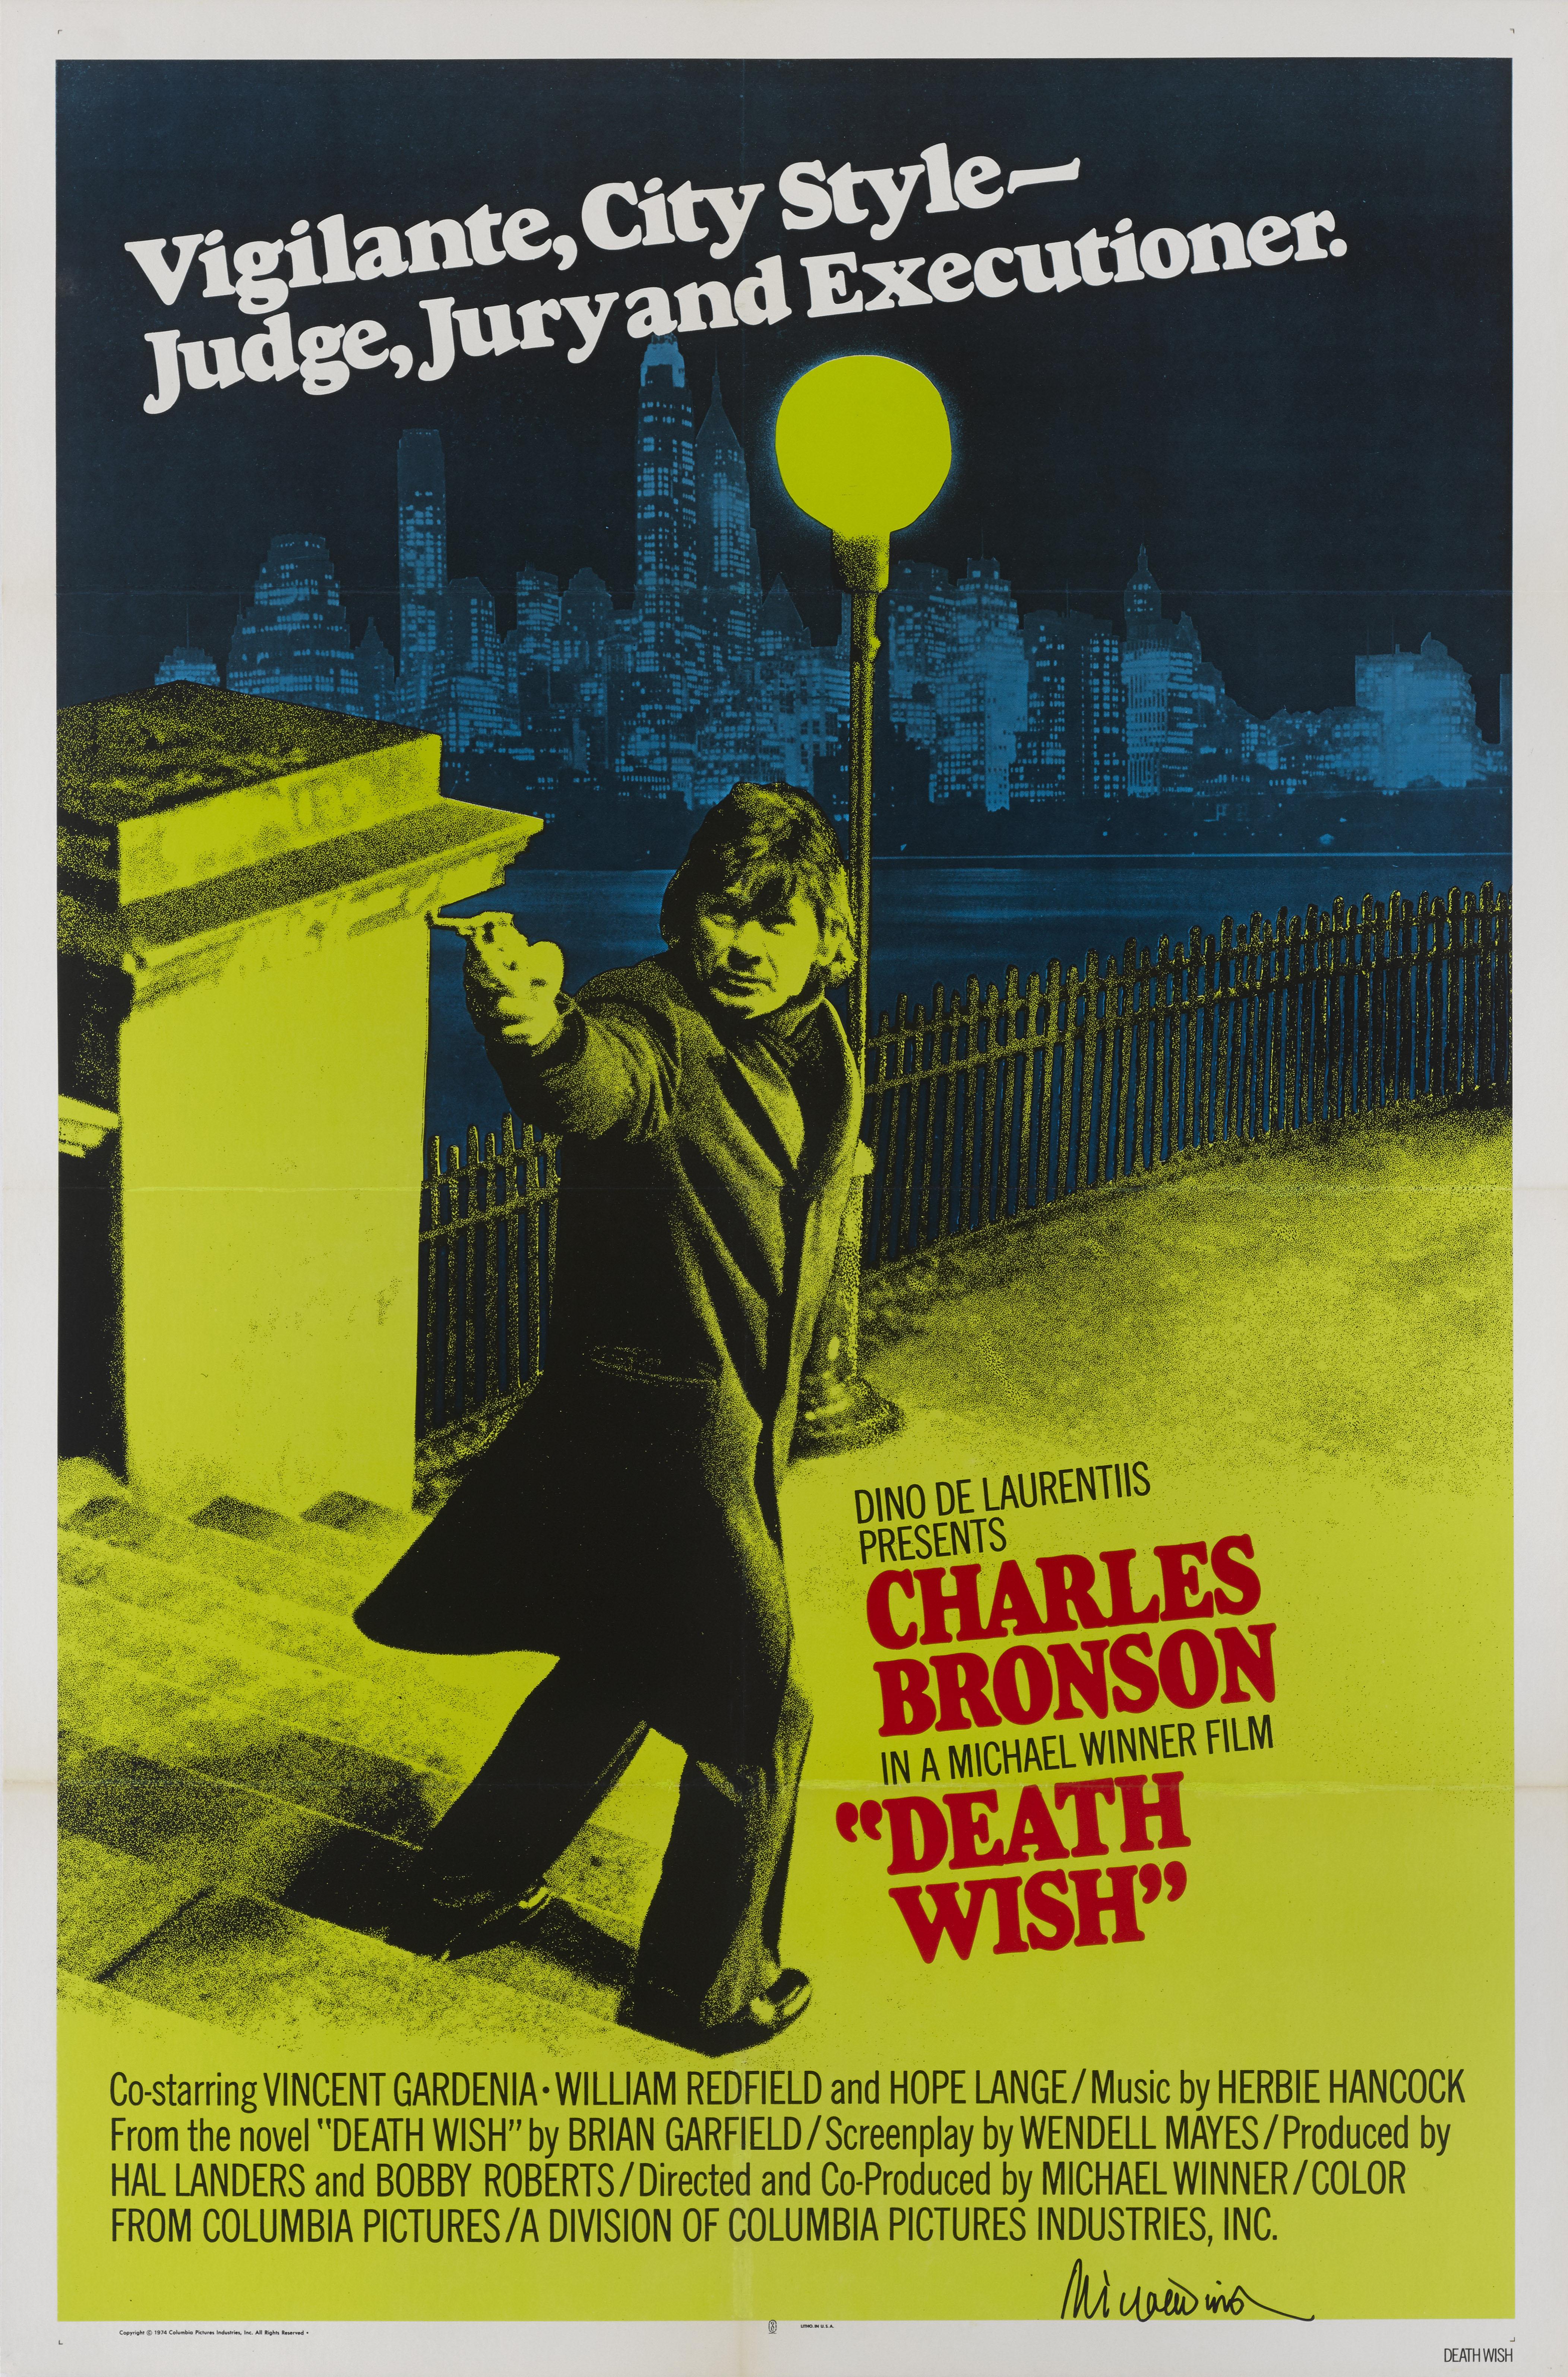 Original US International style film poster for 1974 film Death Wish. This action film was directed by Michael Winner and stars Charles Bronson. It was the first in the Death Wish franchise. Bronson plays Paul Kersey, an architect in New York, who